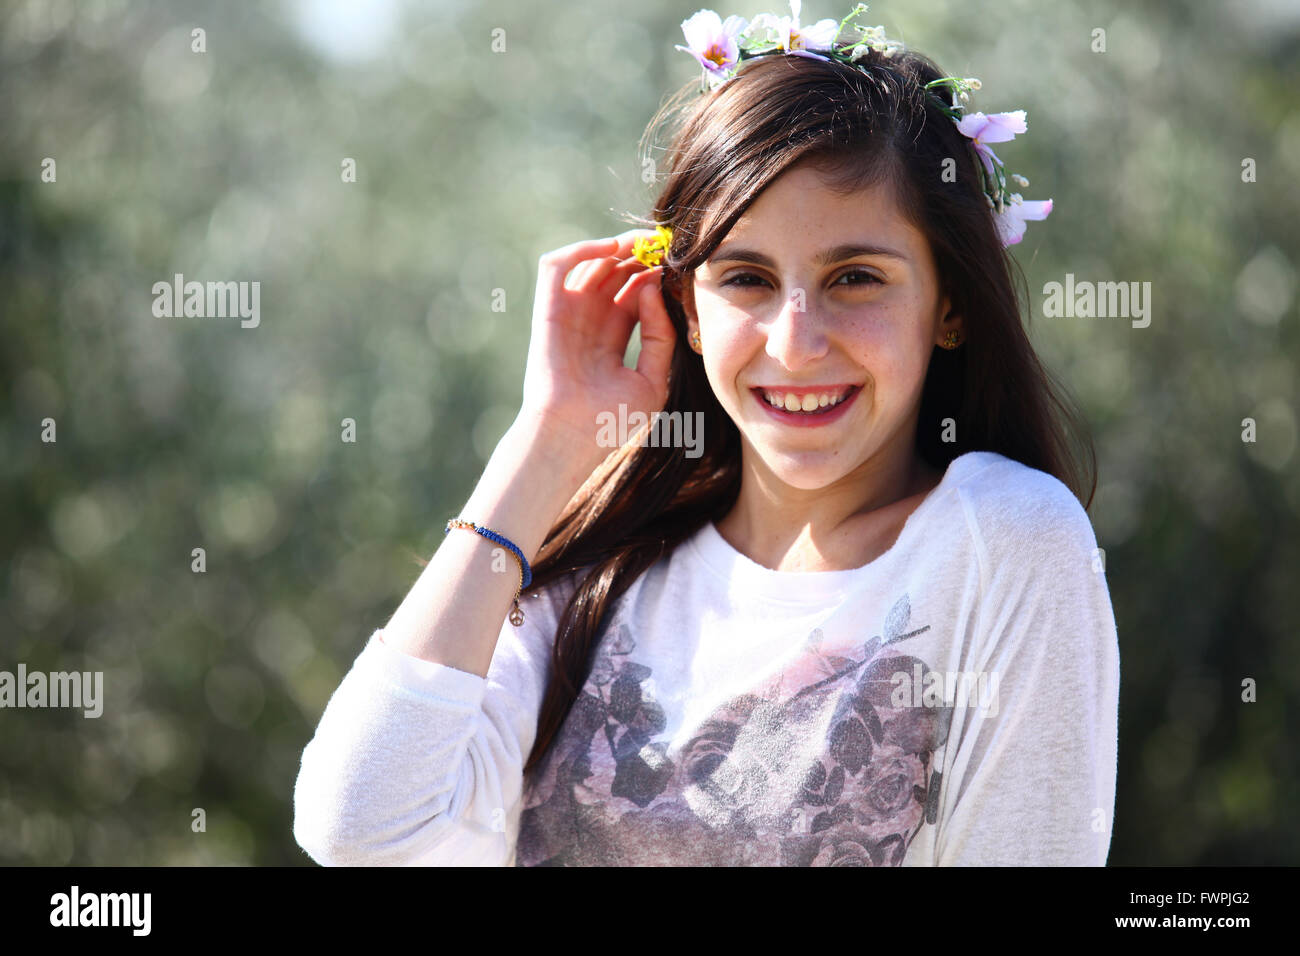 Young twelve year old preteen girl outdoors enjoys nature (model release available) Stock Photo